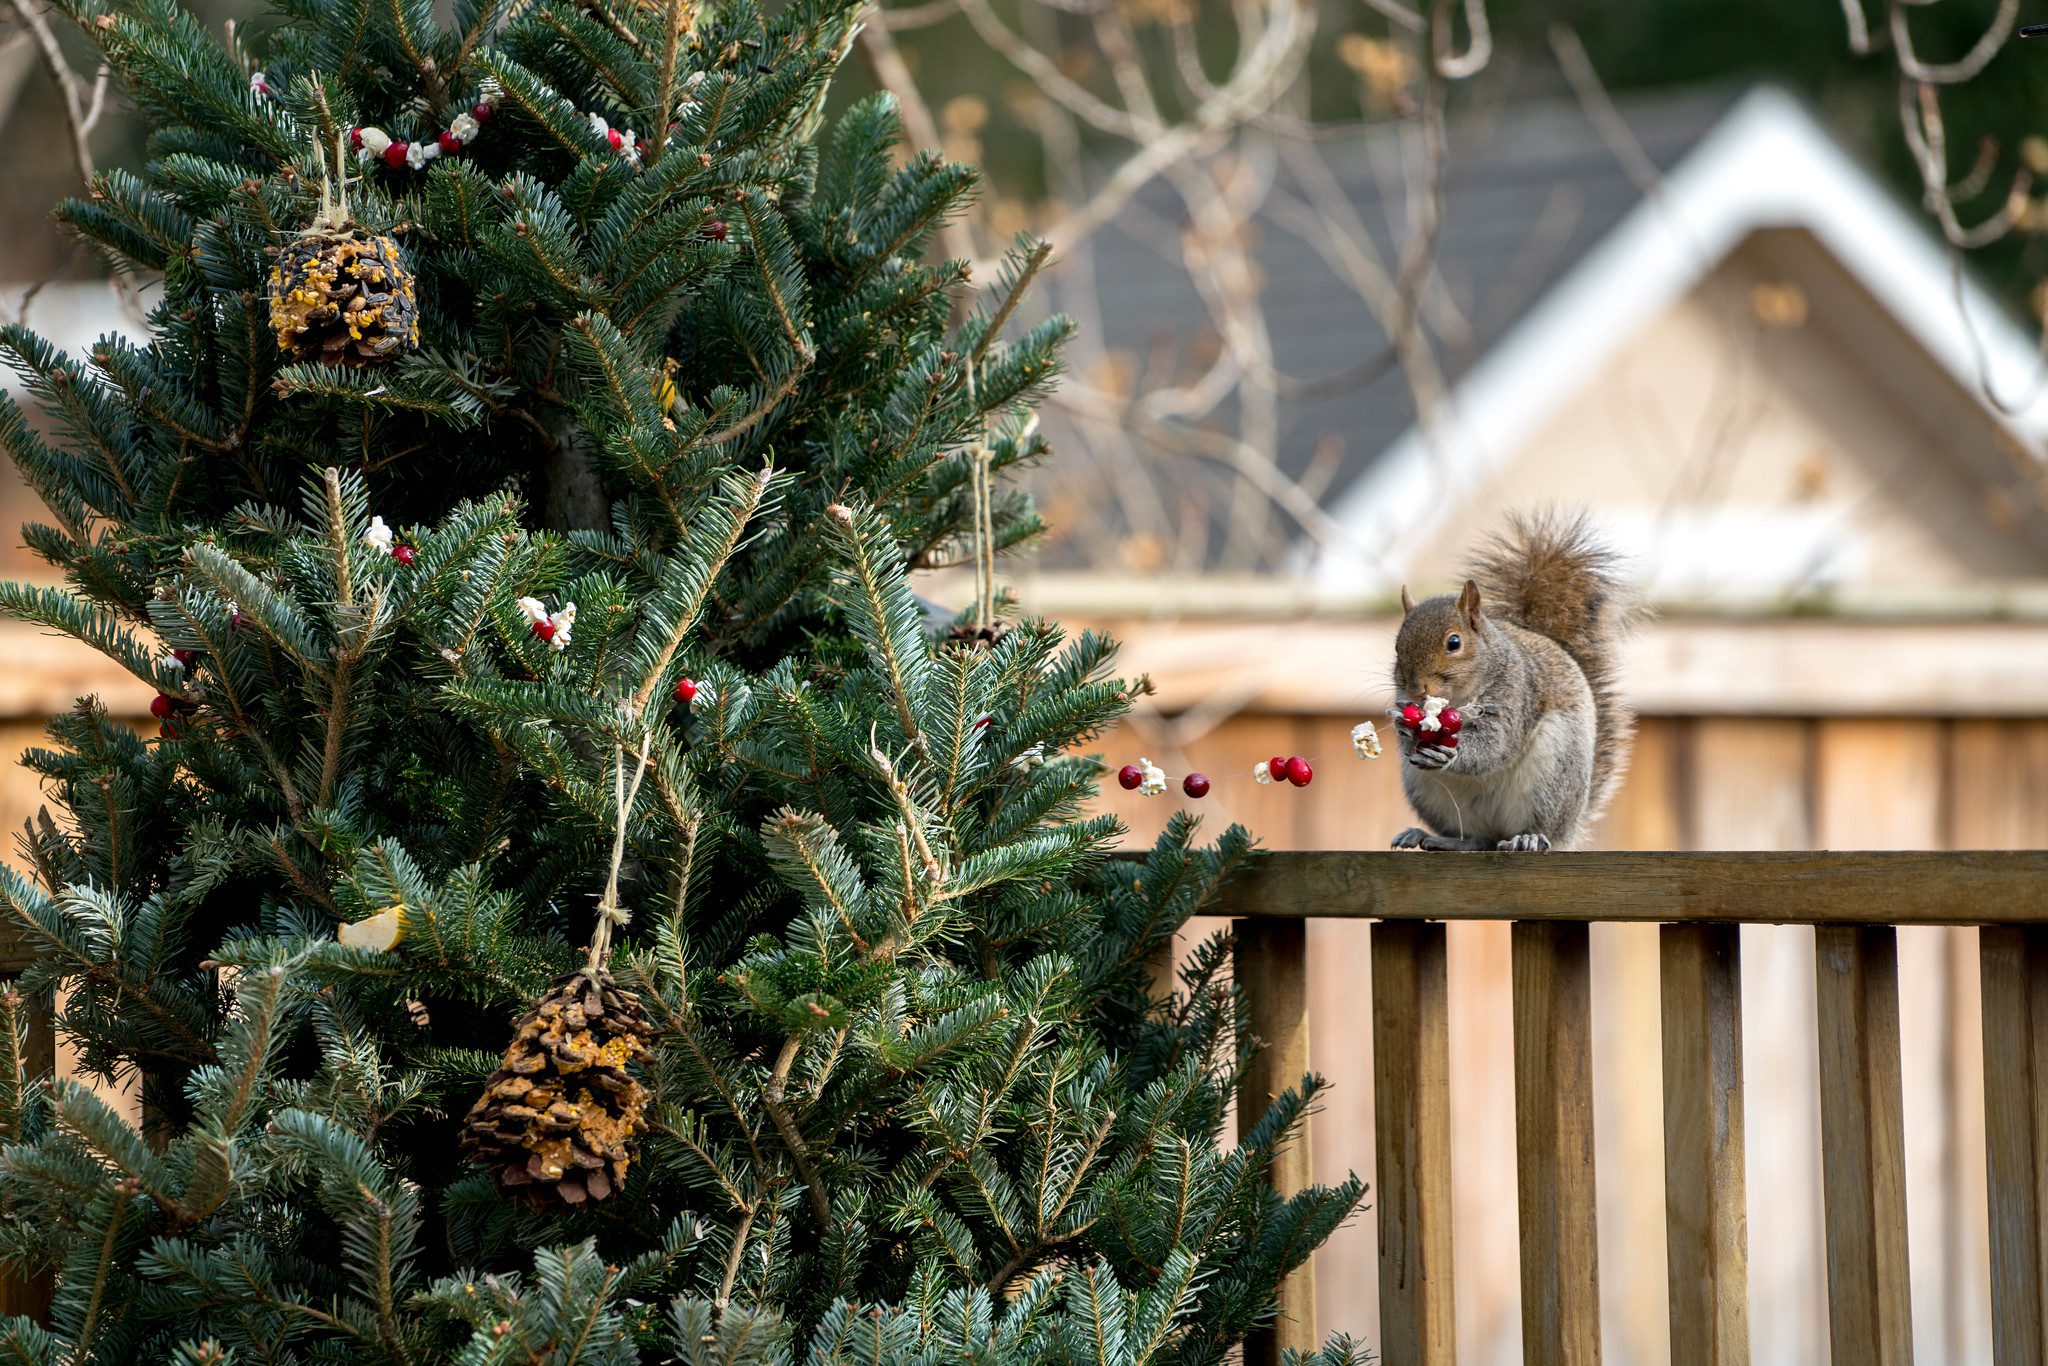 Christmas tree with a squirrel